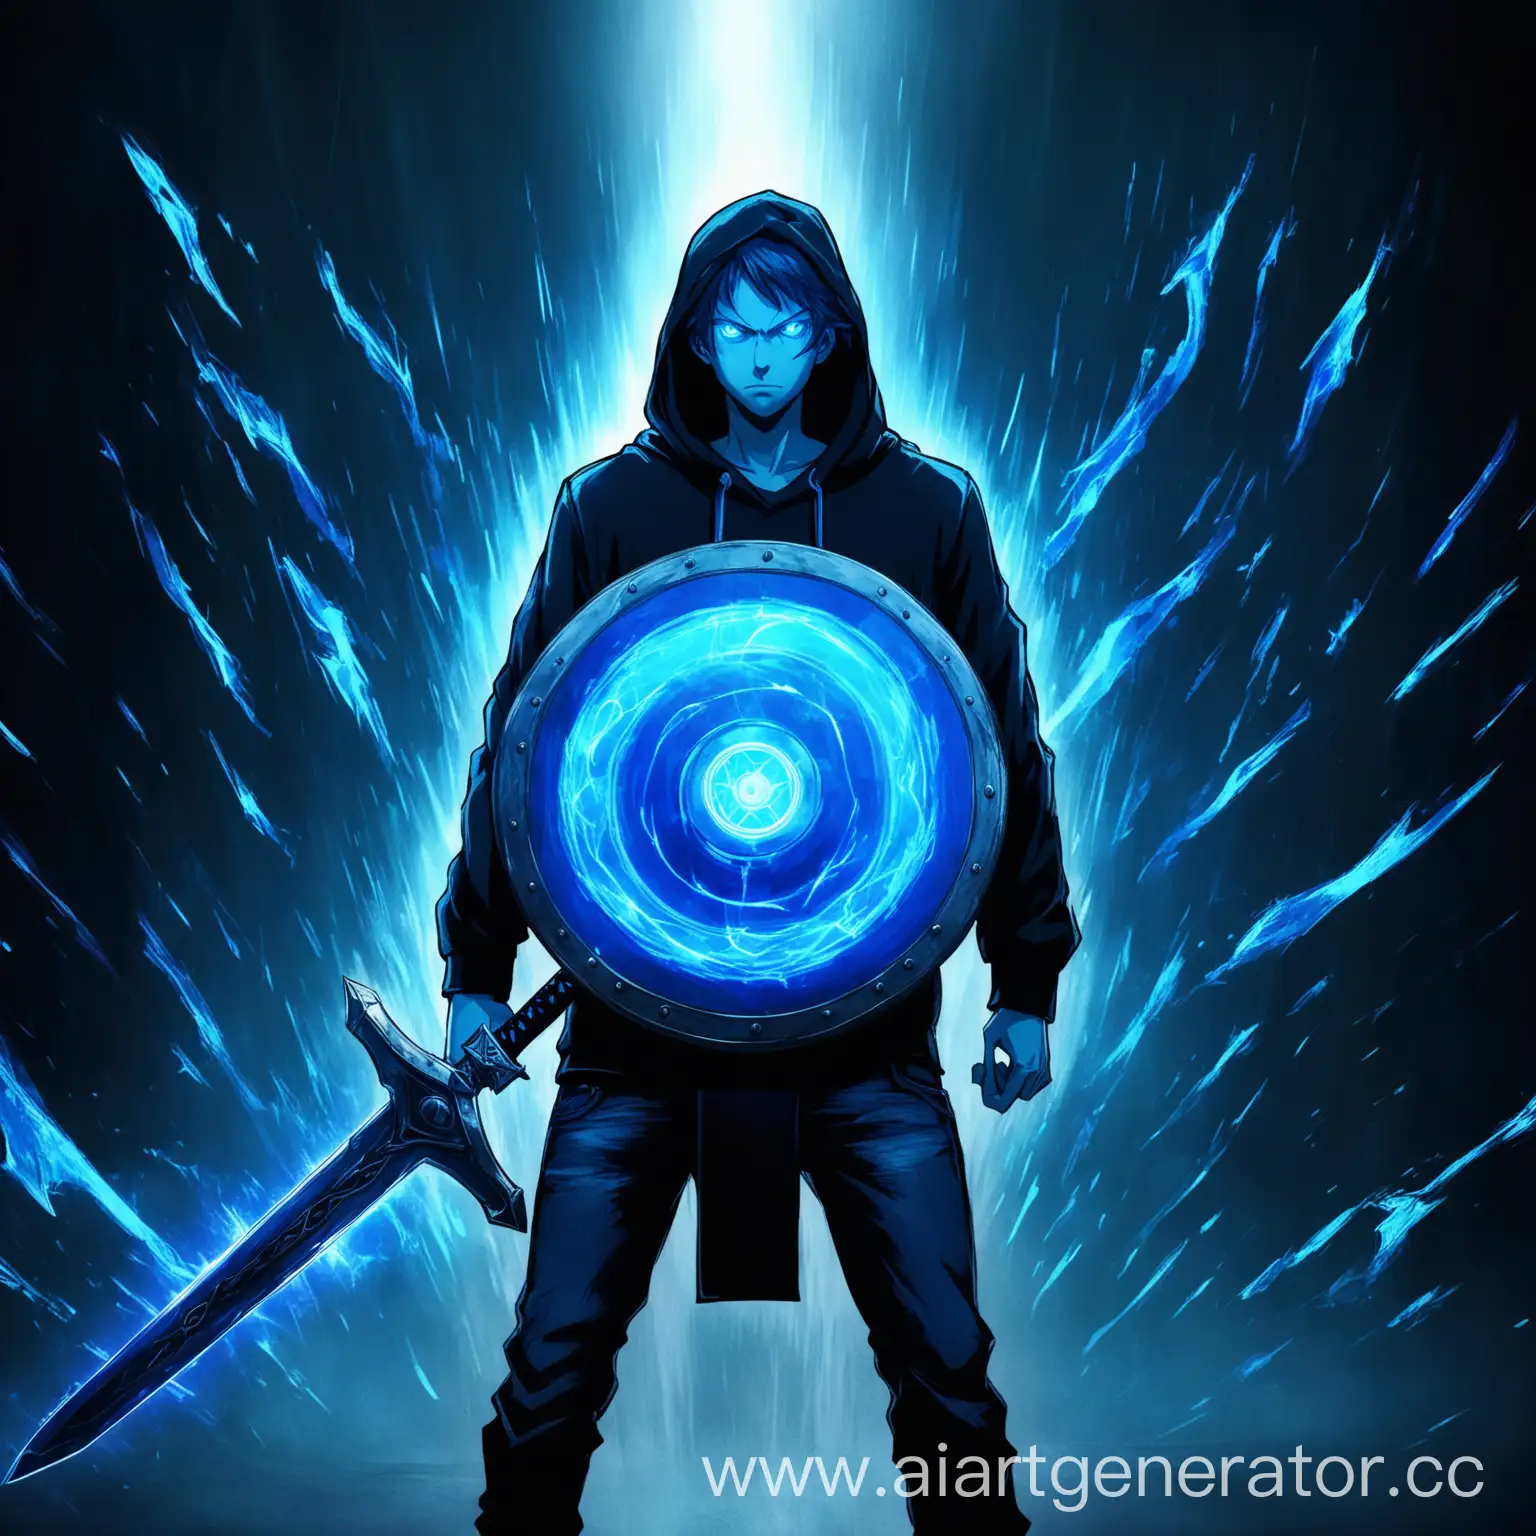 Lololoshka-in-Dark-Room-with-Glowing-Blue-Energy-Sword-and-Shield